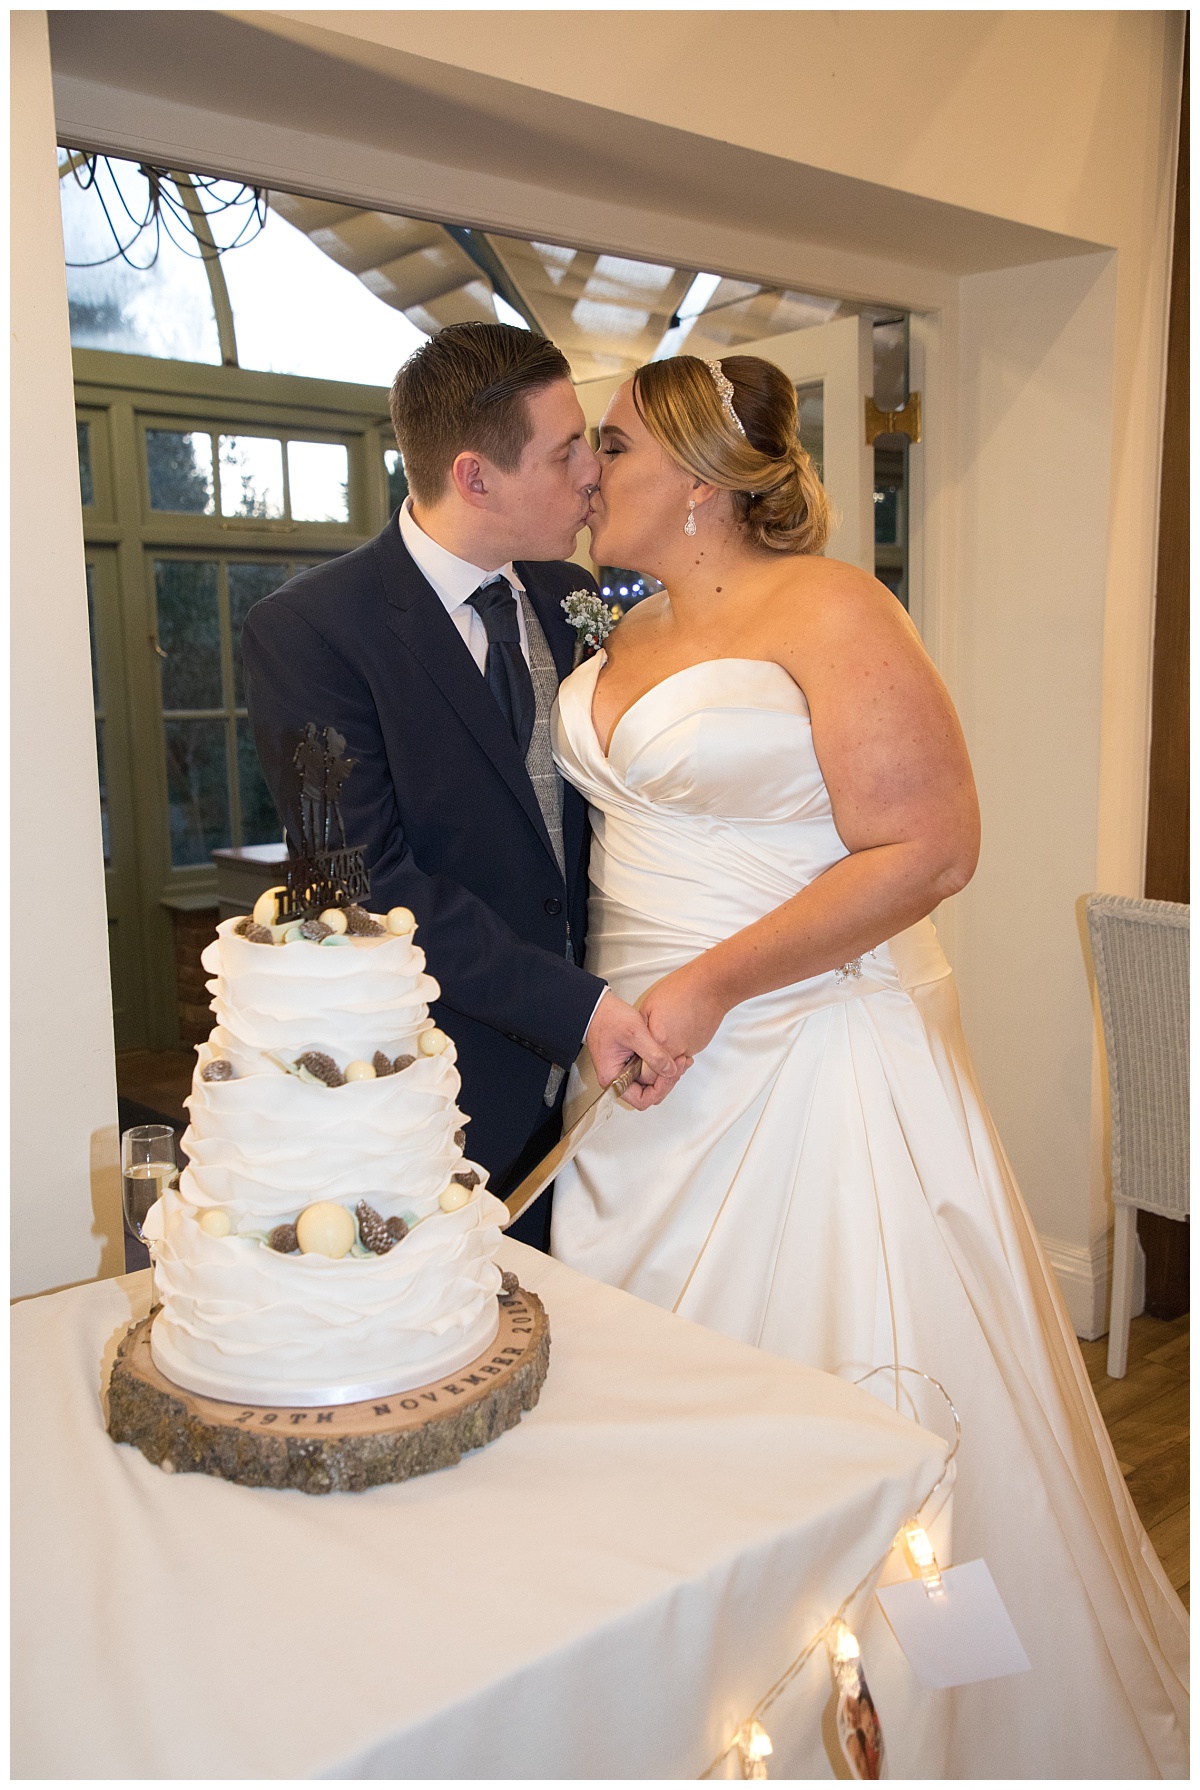 Wedding Photography Manchester - Lorna and Vinny's Abbeywood Estate and Gardens Wedding 101